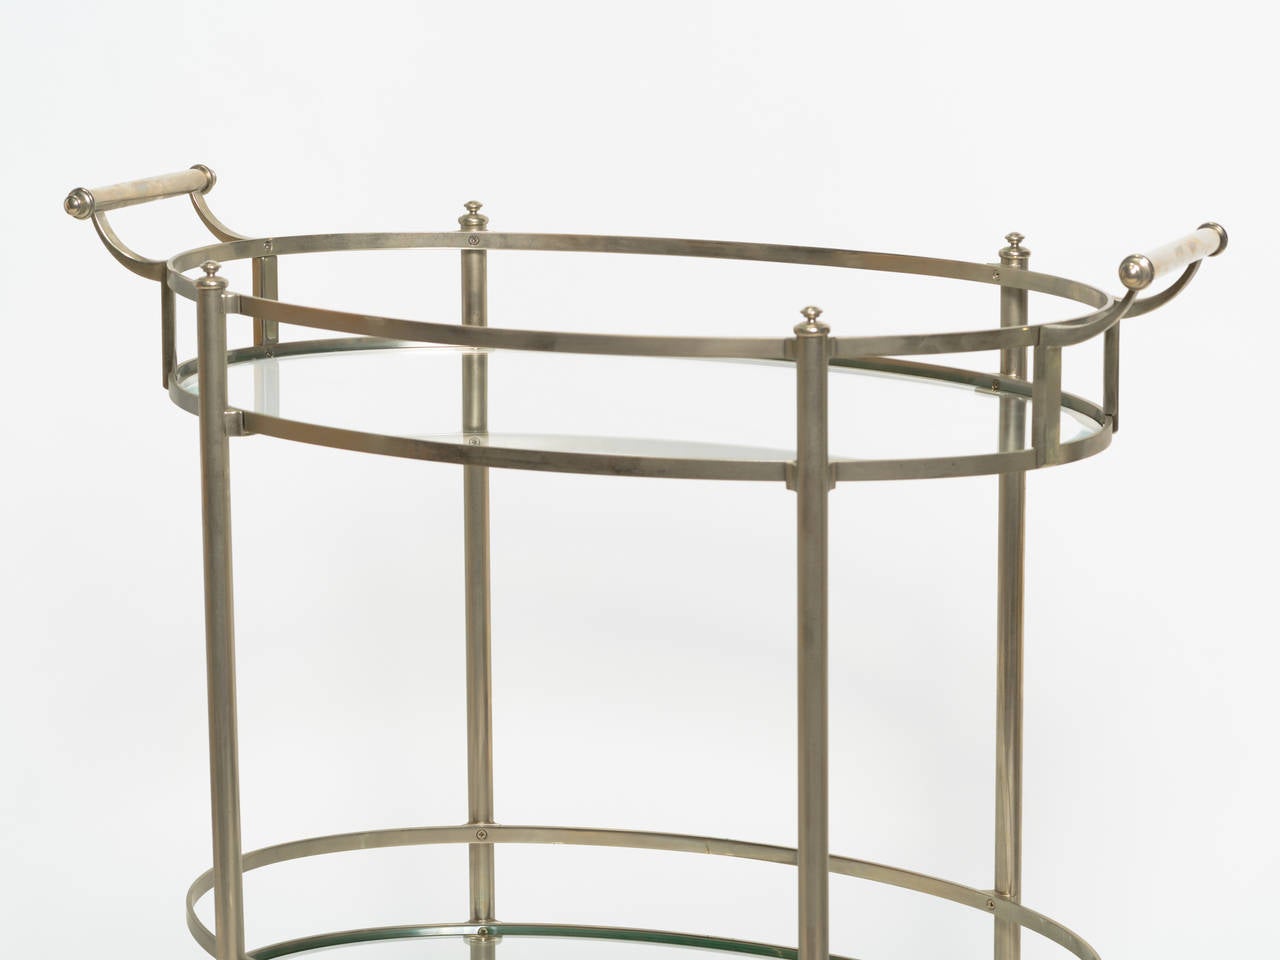 Mid century modern nickel plated serving cart with beveled edge glass shelves.